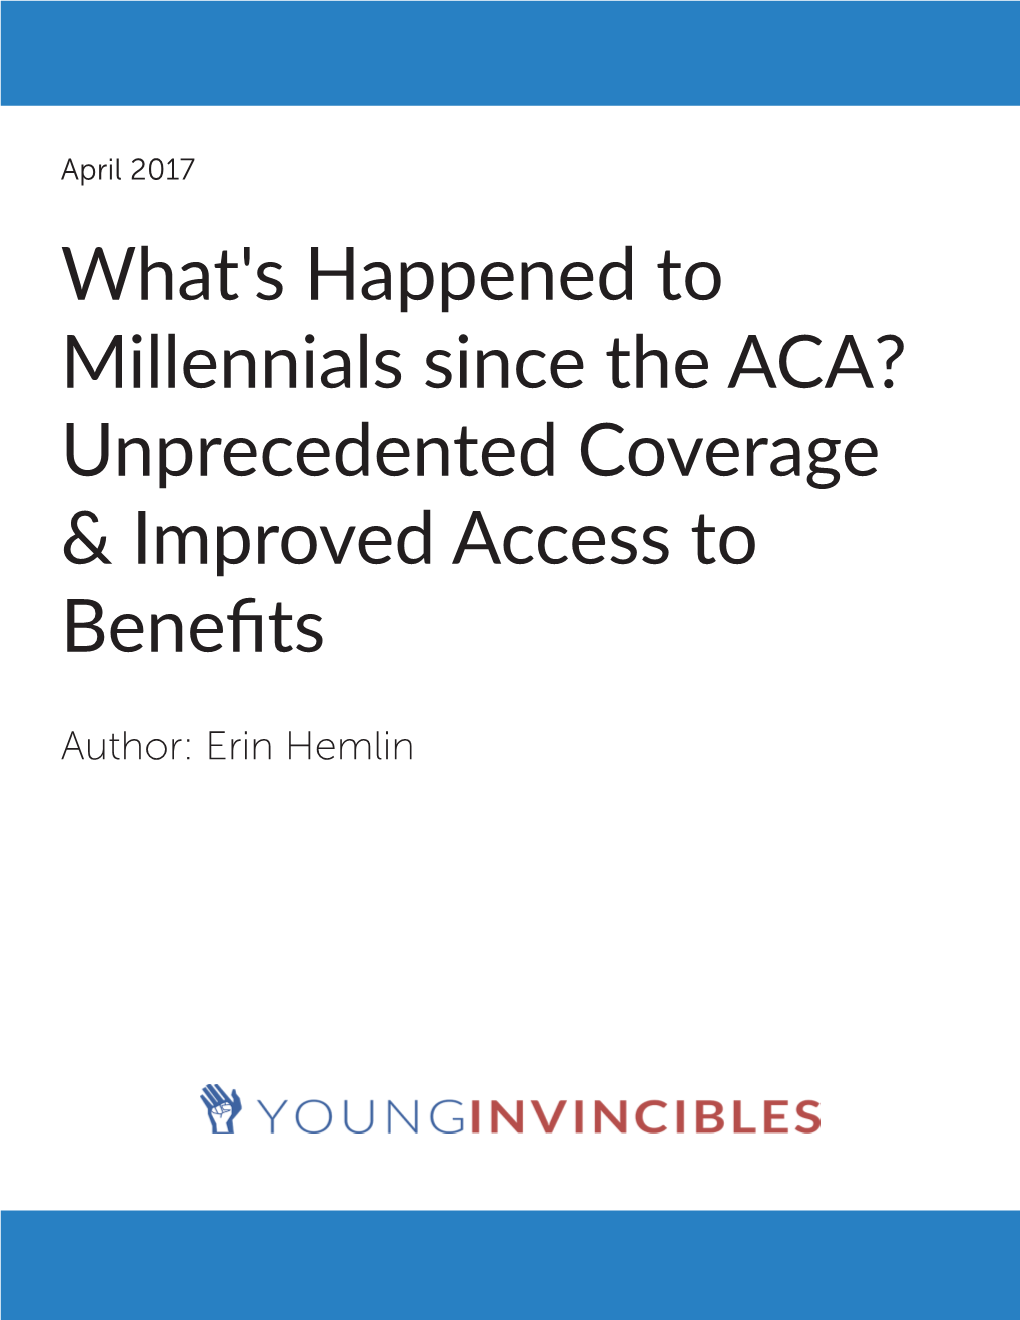 What's Happened to Millennials Since the ACA? Unprecedented Coverage & Improved Access to Benefits